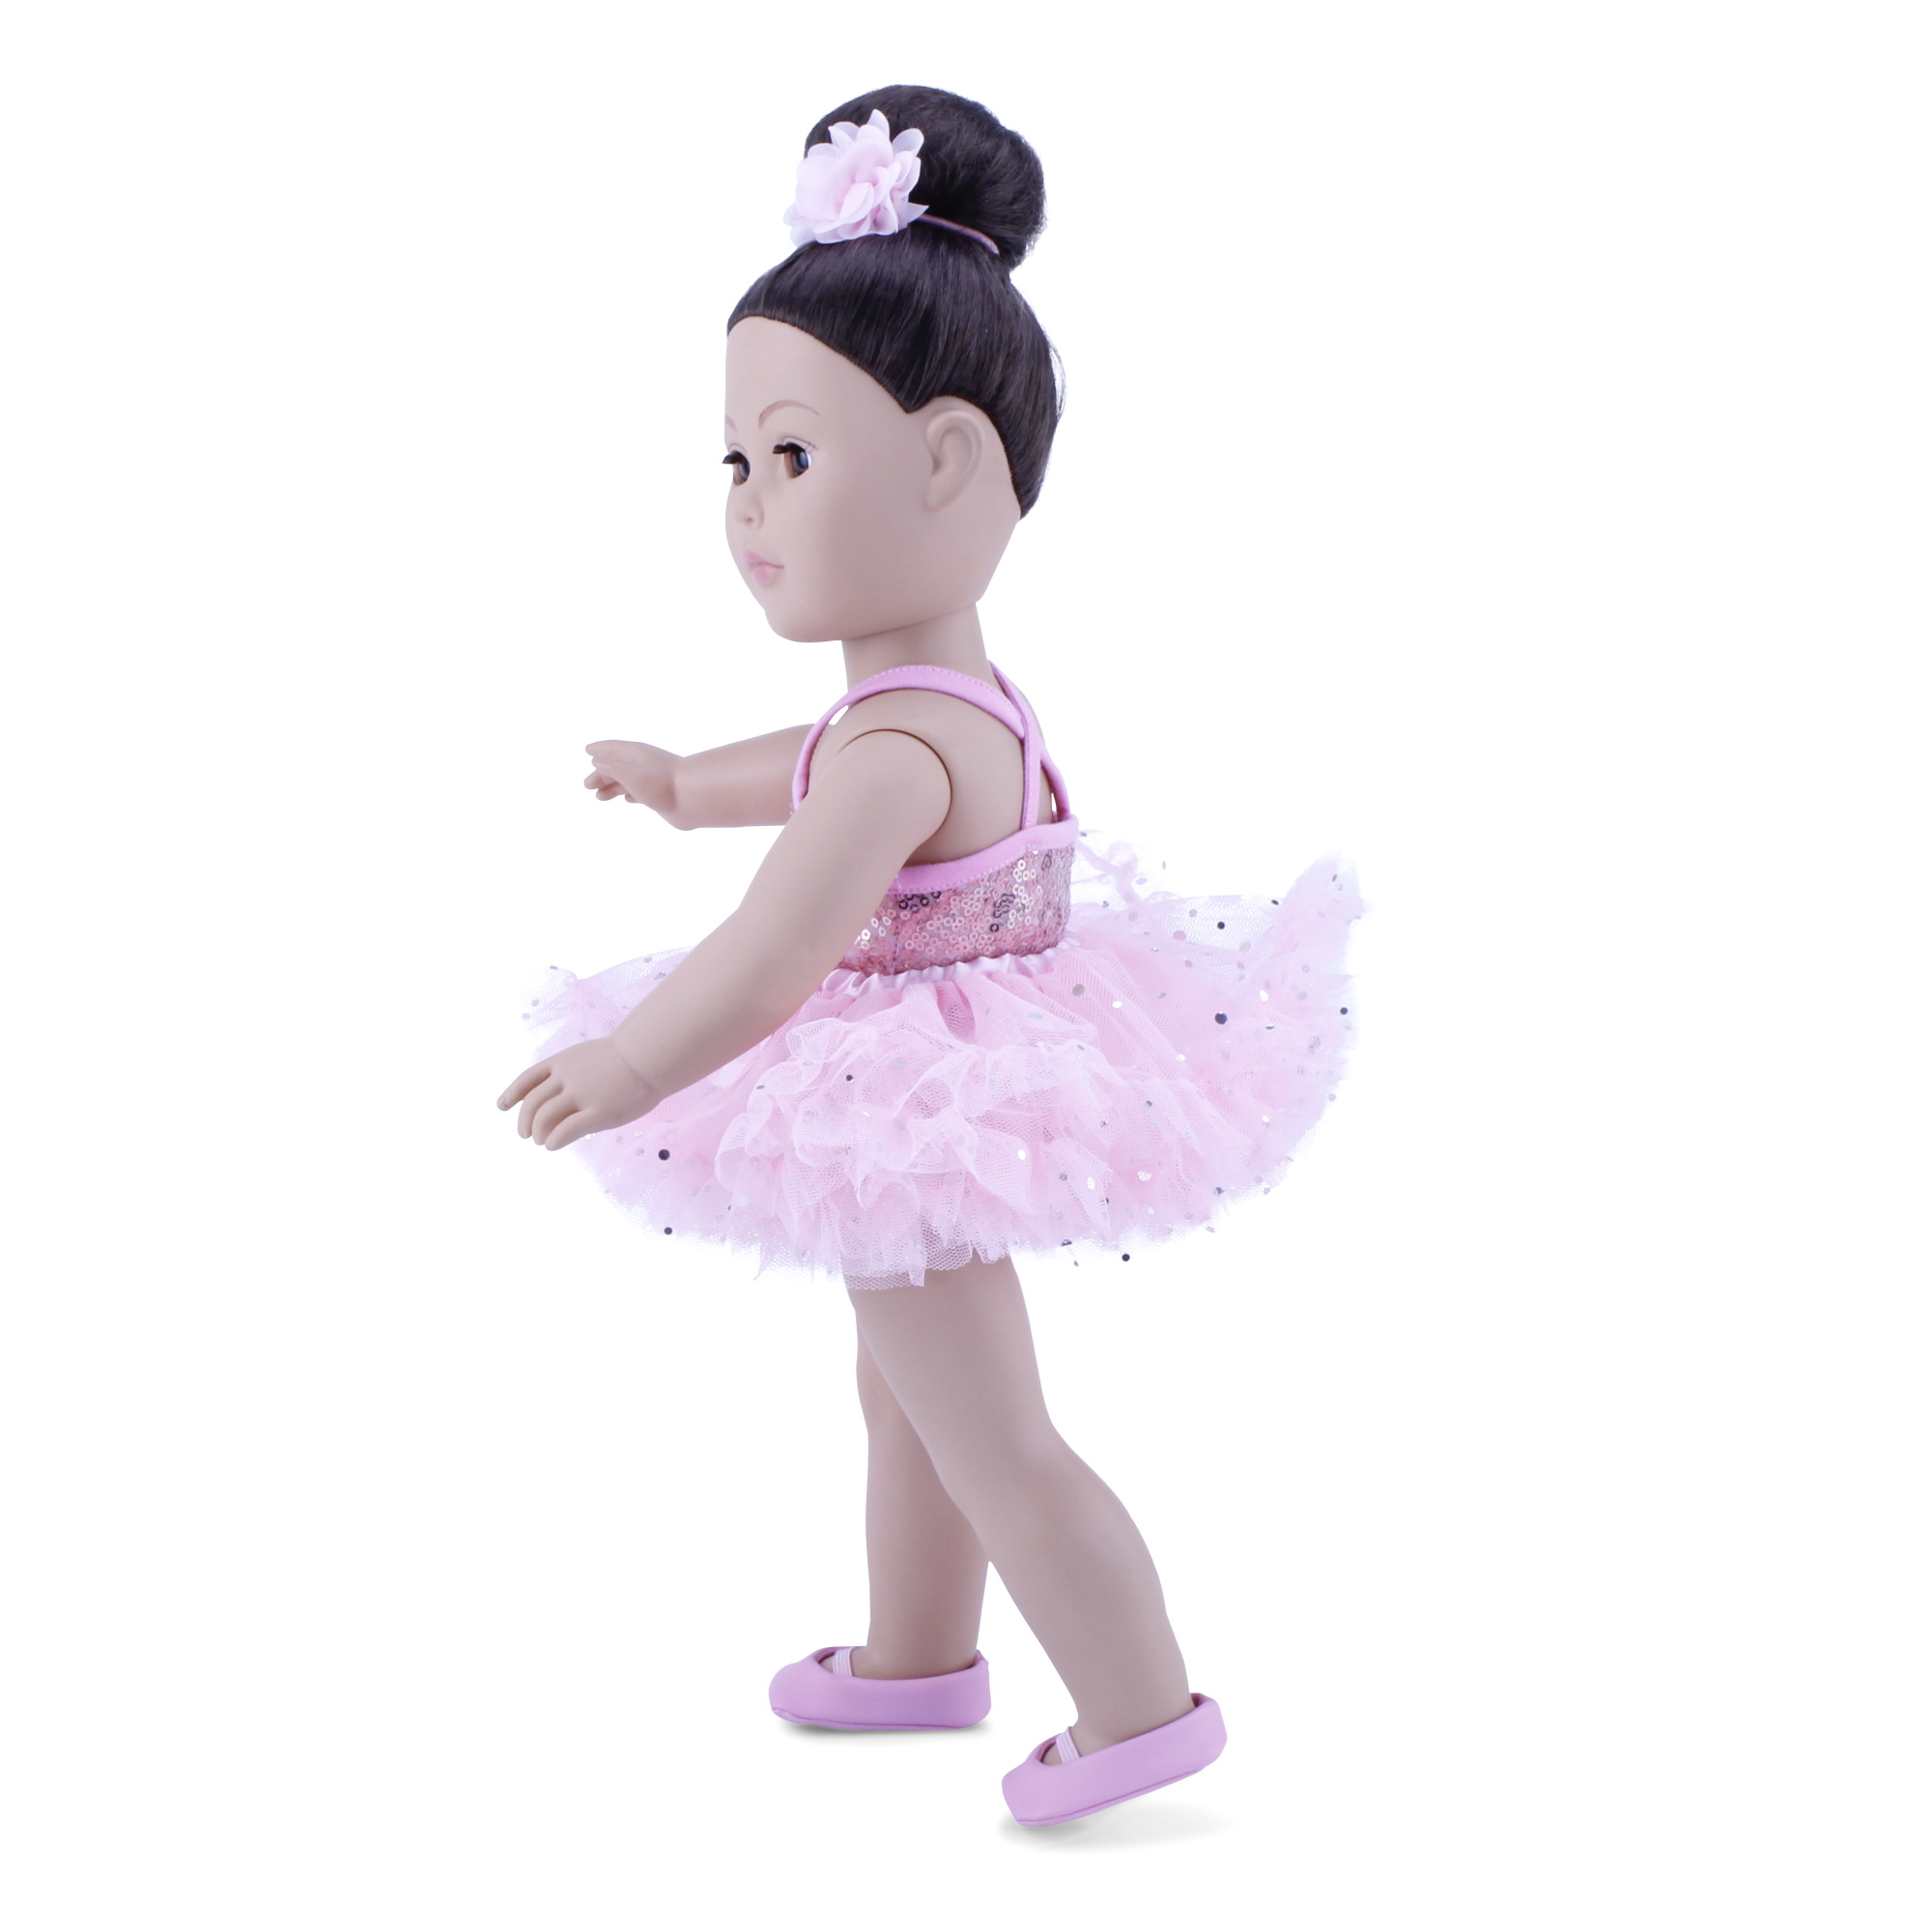 American Girl (アメリカンガール) Marisol's Ballet Outfit For 18 Doll NOT Included  ドール 人形 フィ アメコミ